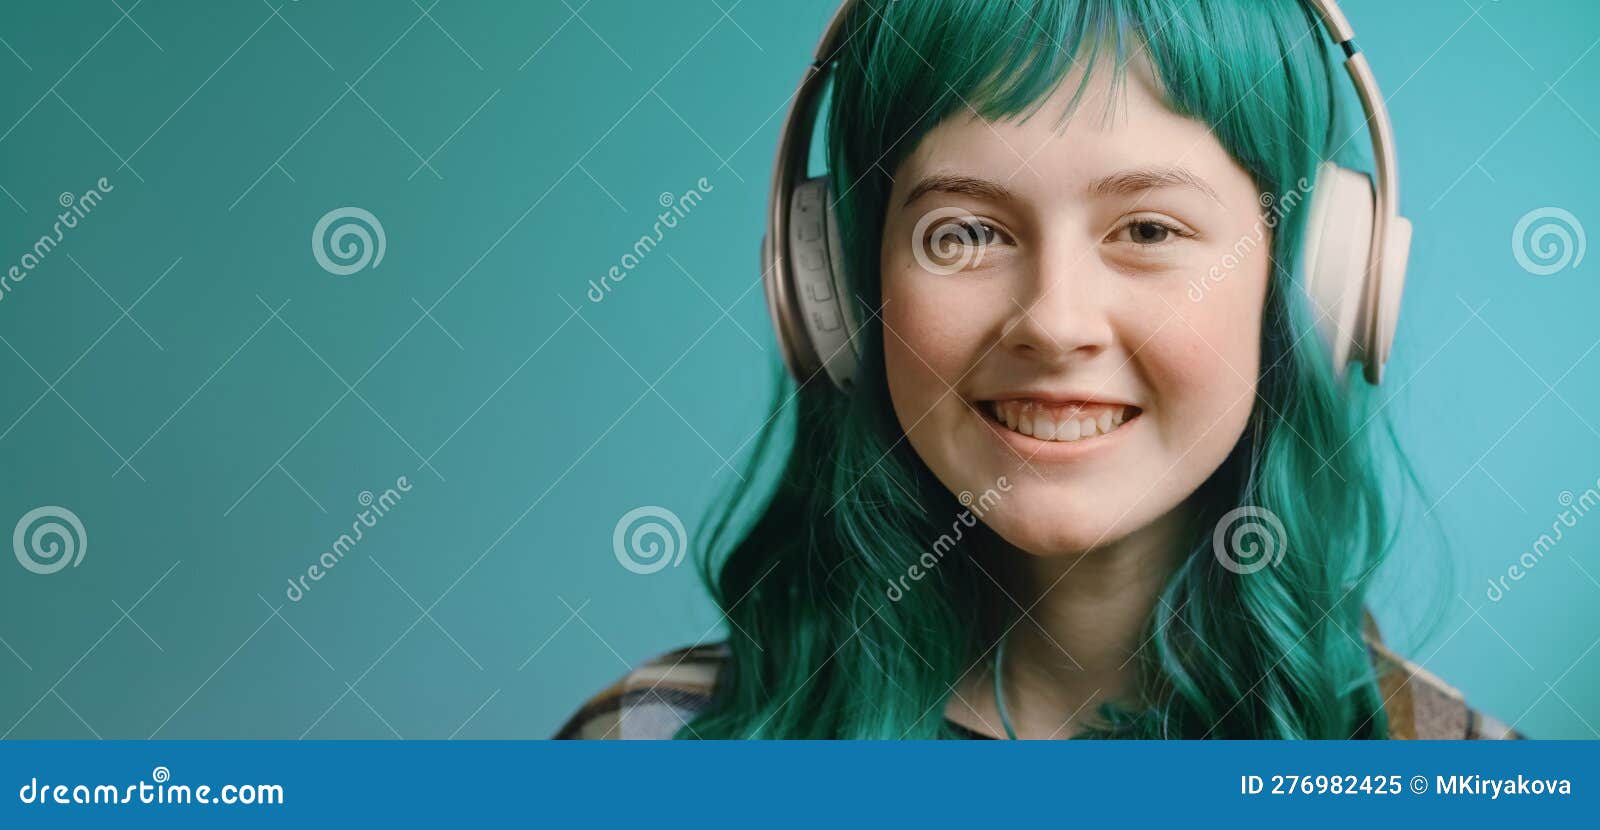 gen z teenager with green hair listens music in headphones. music subscription service concept.